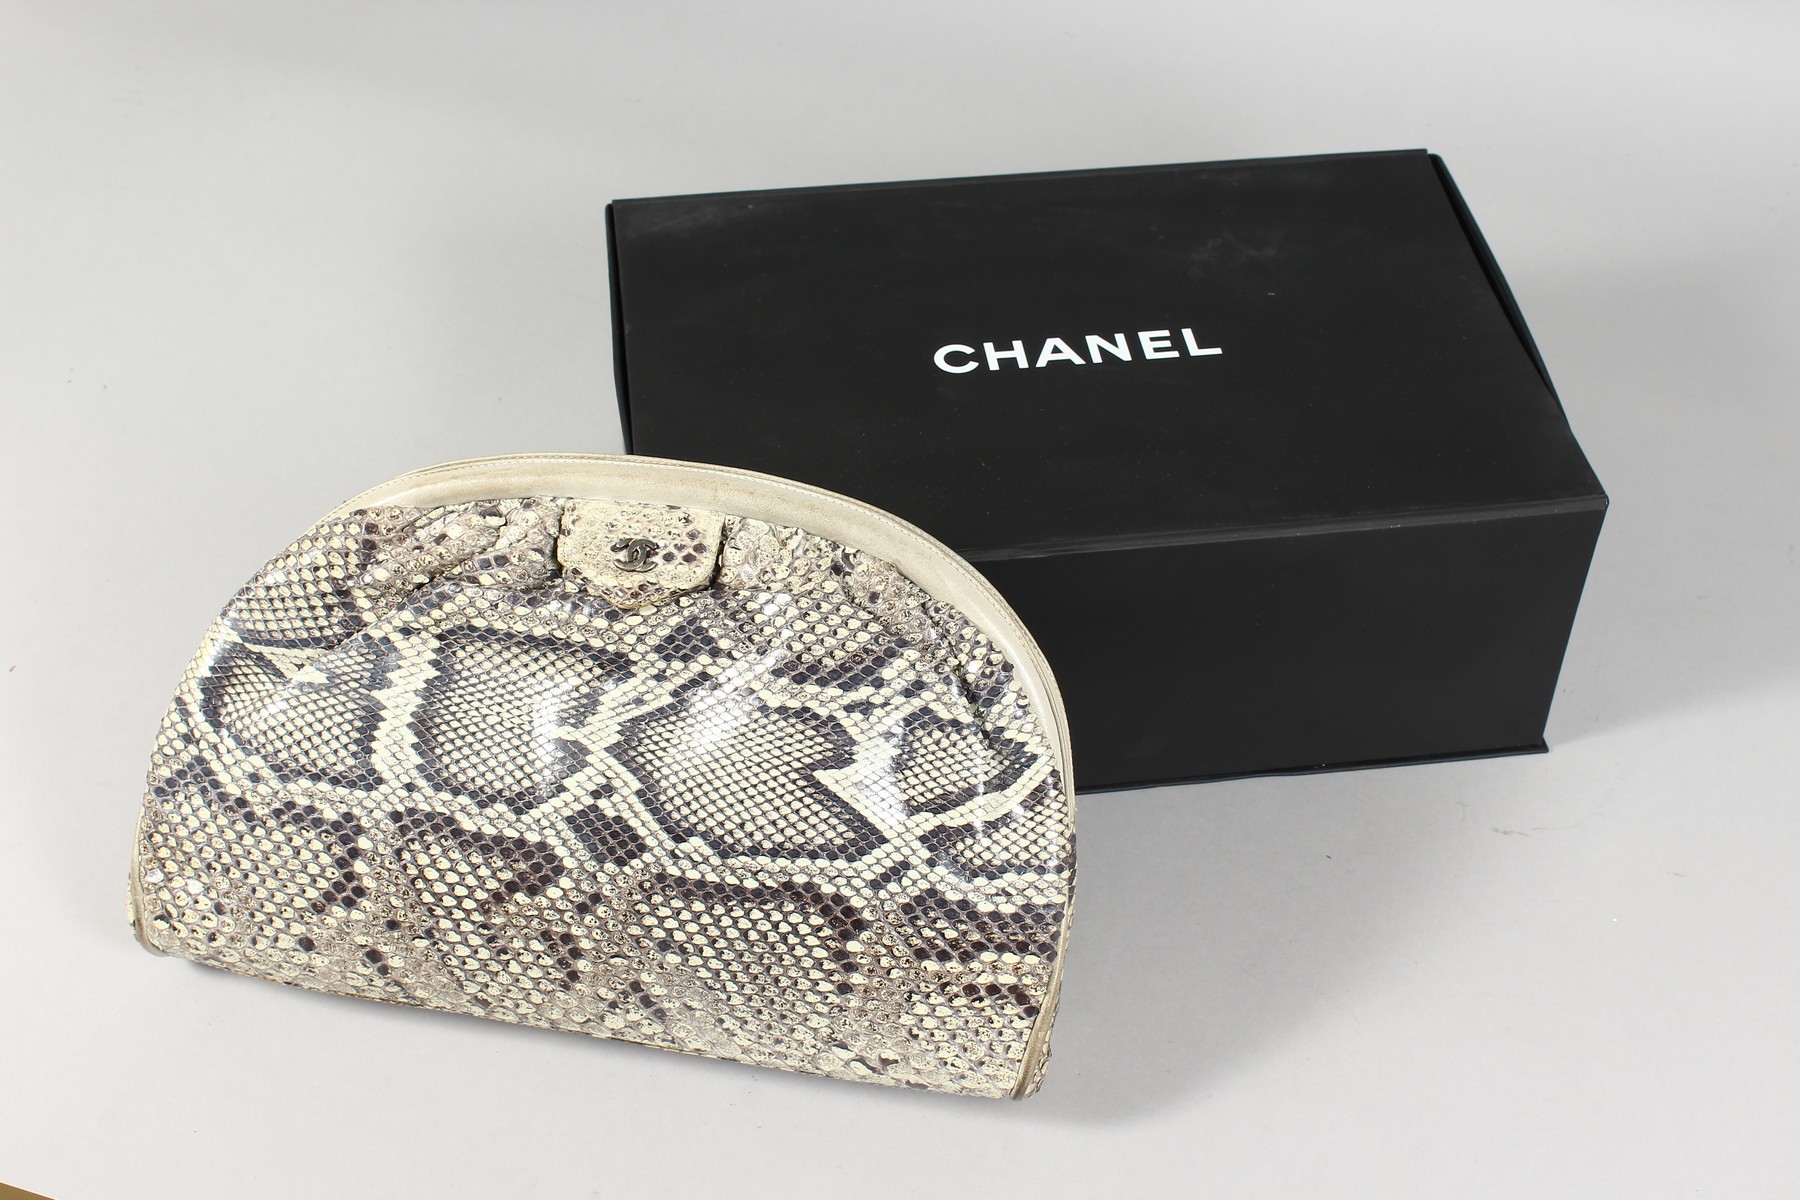 A CHANEL SNAKESKIN BAG with leather interior. Made in Italy. 11ins long. - Image 6 of 9